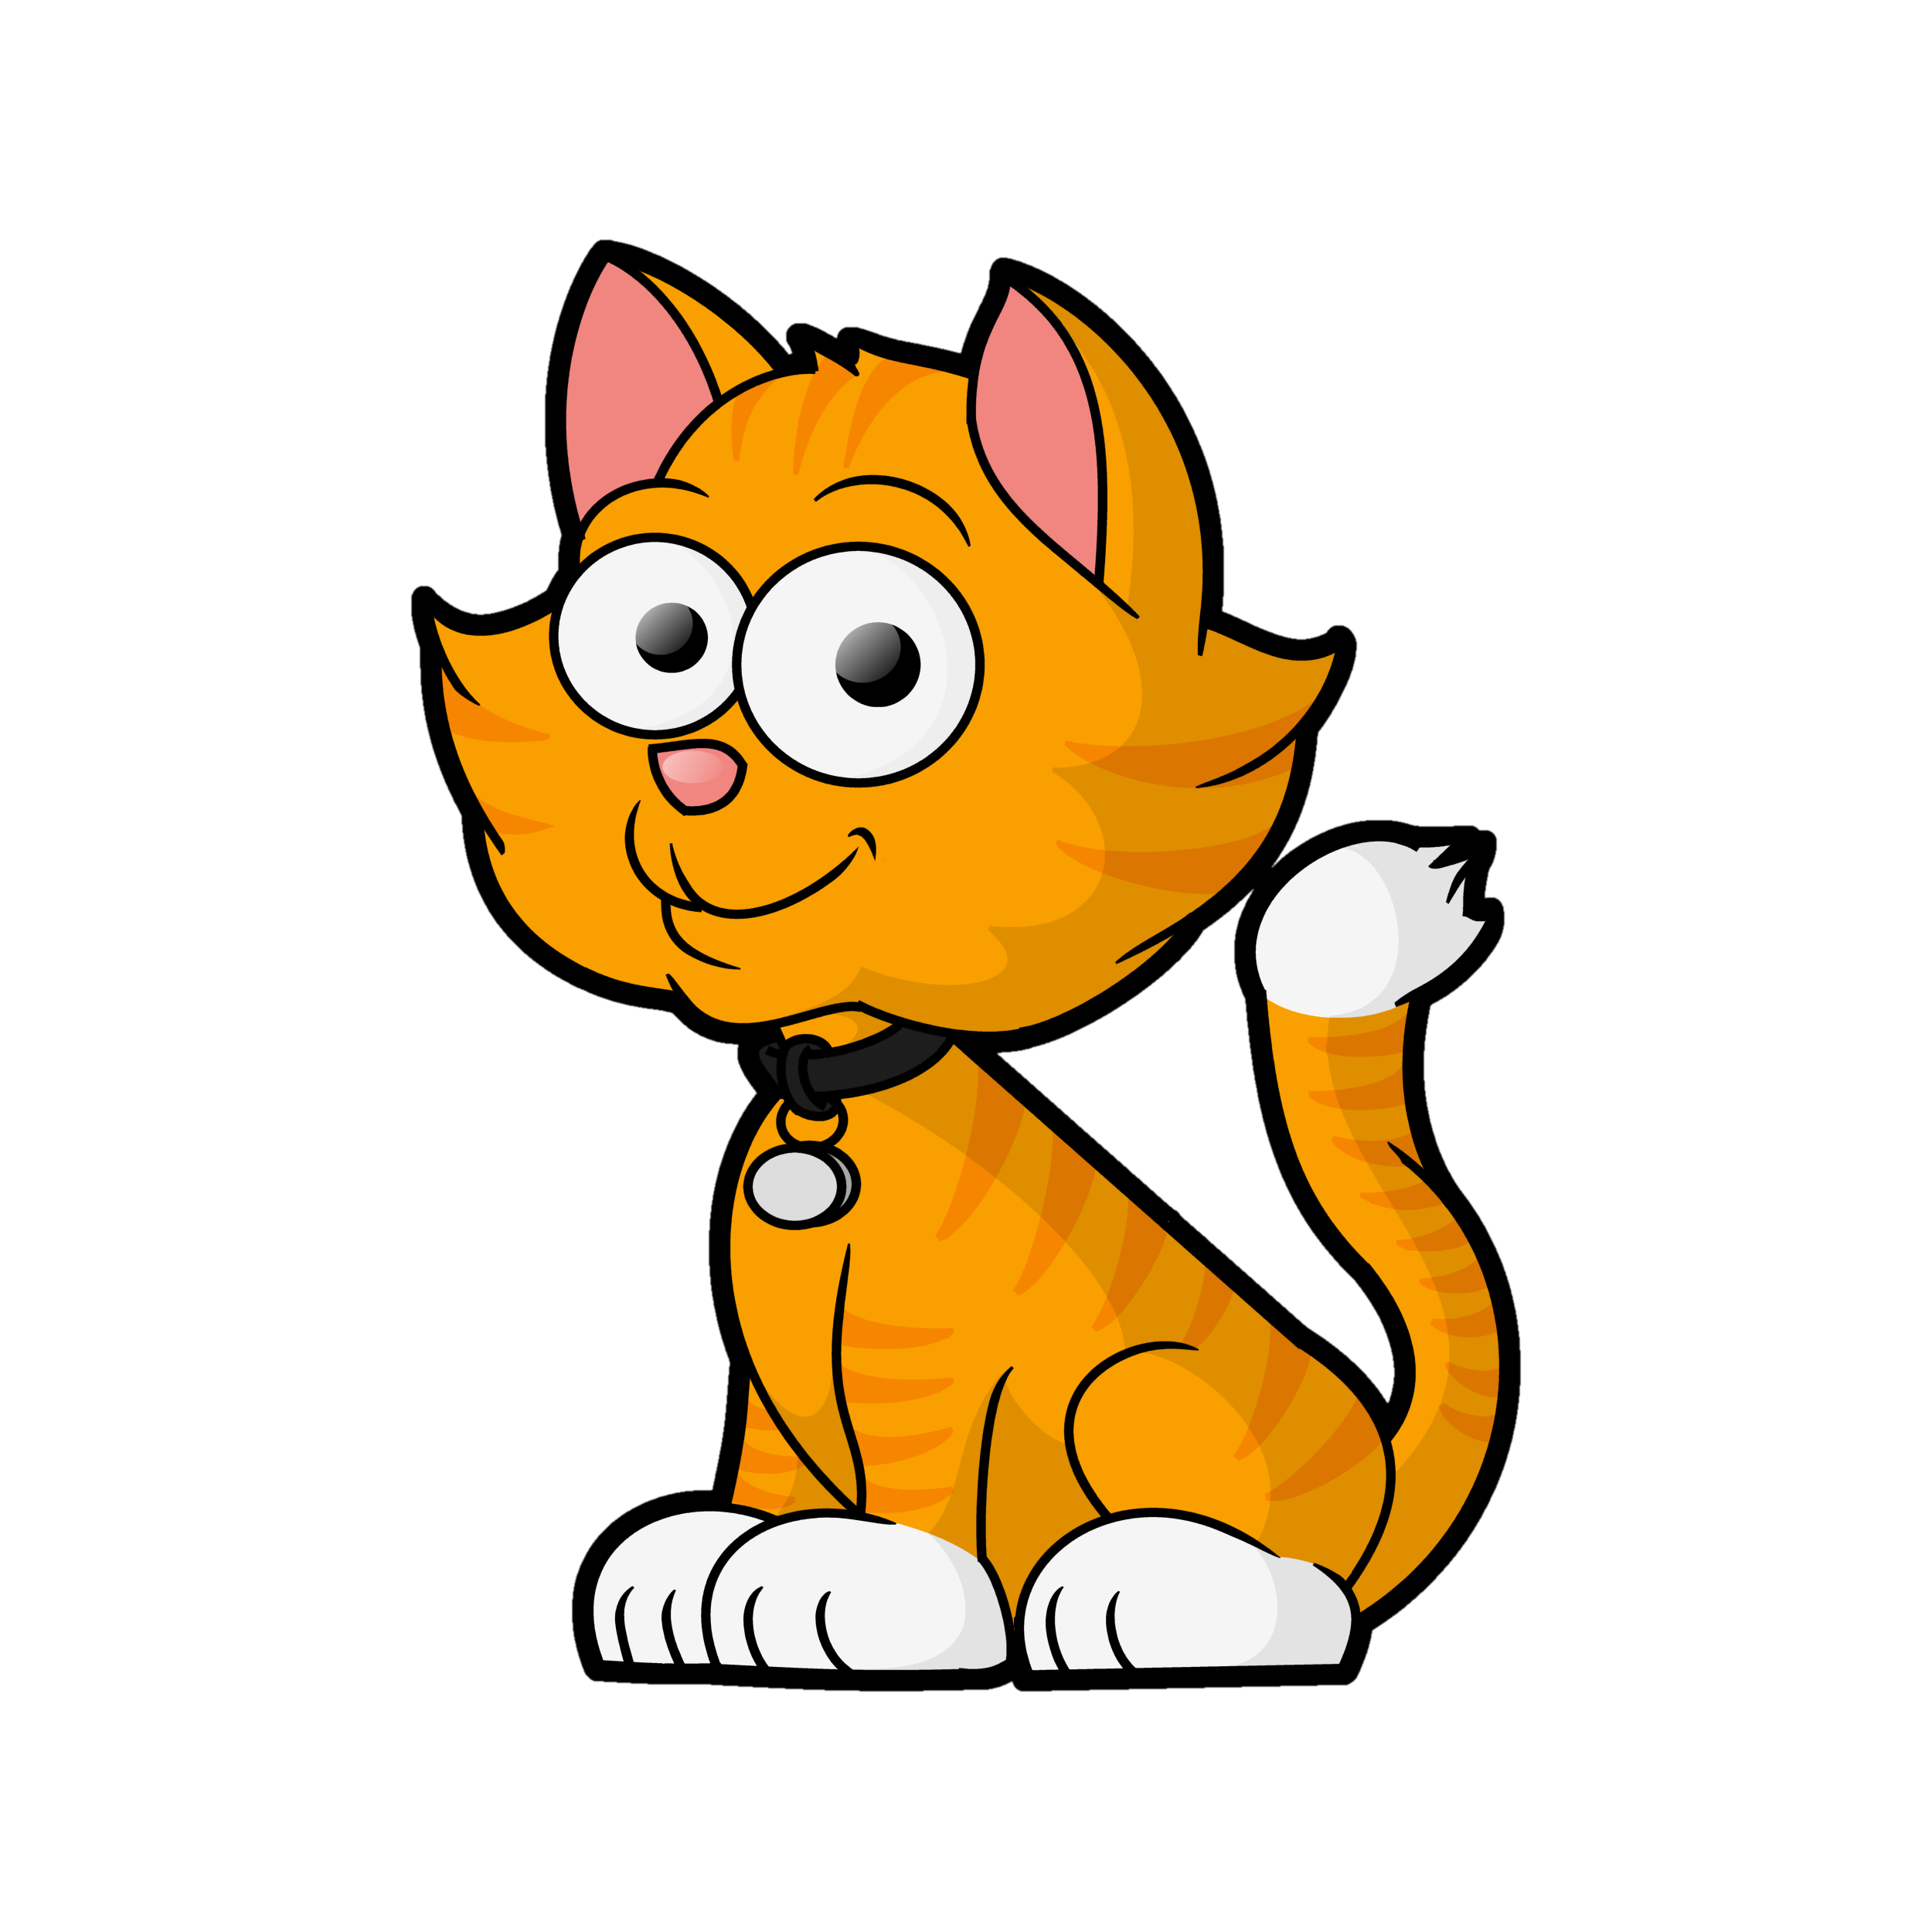 Purr Cat S Are Today S Topic As I Have Uploaded A Free Cartoon Cat